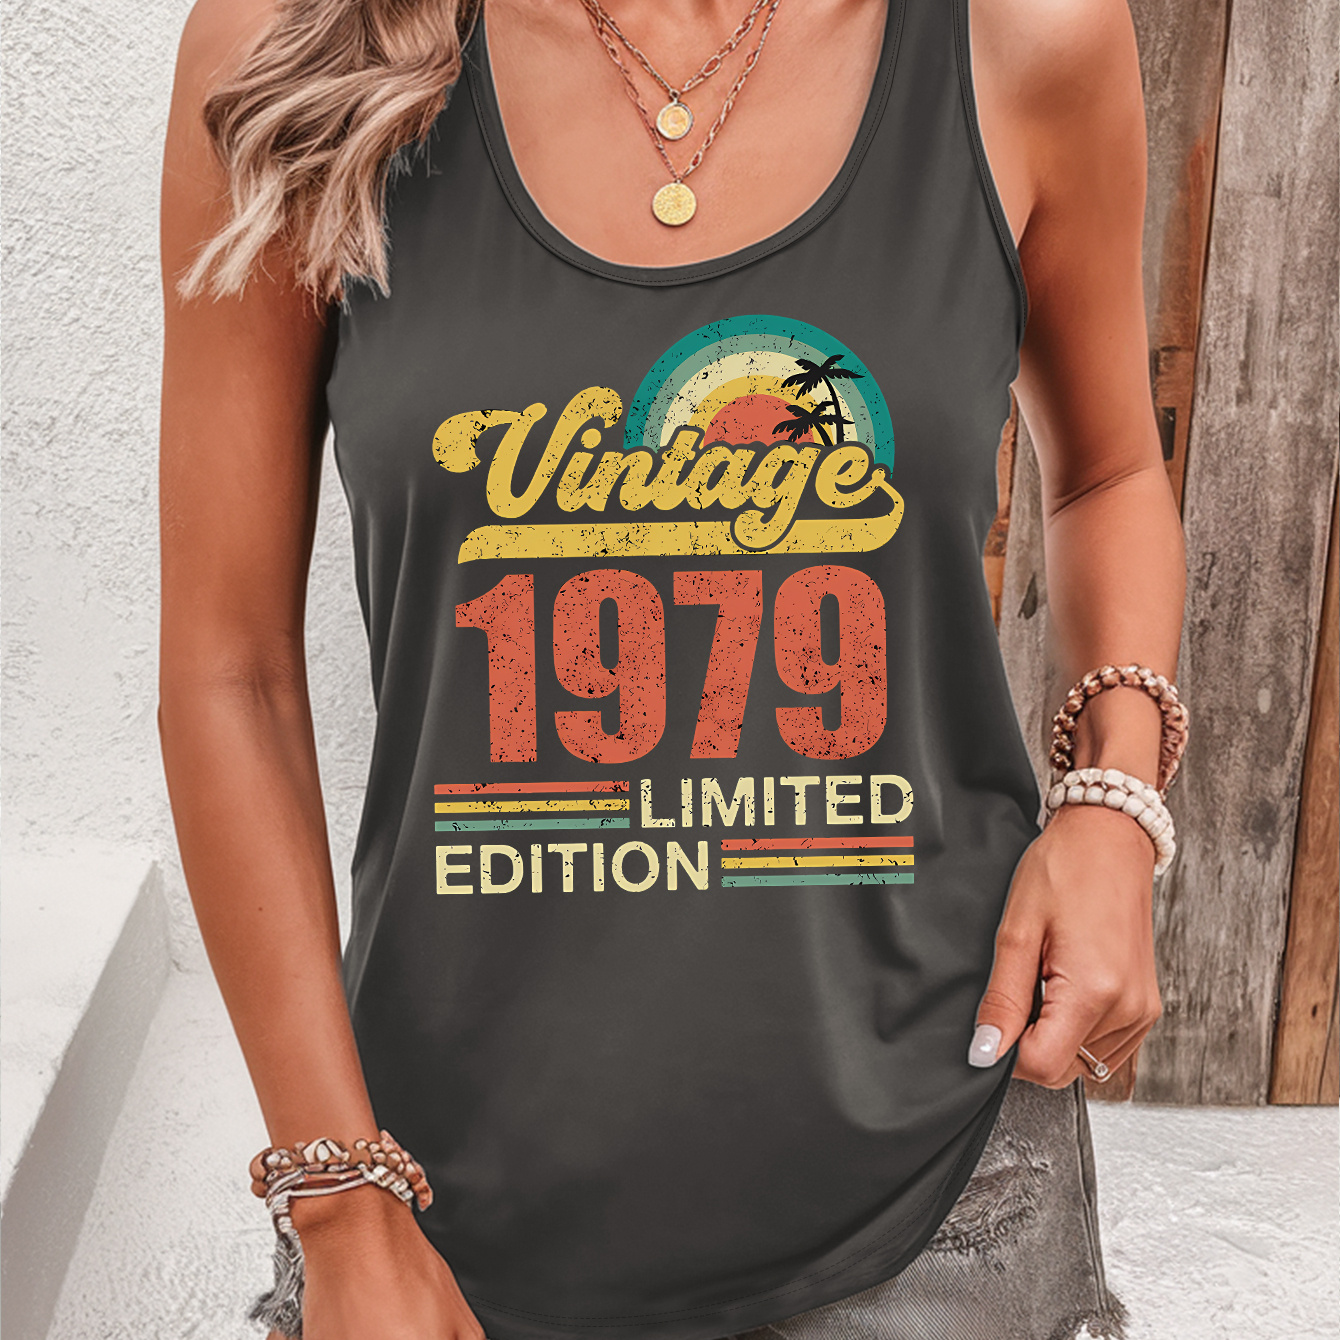 

Vintage 1979 Print Tank Top, Sleeveless Casual Top For Summer & Spring, Women's Clothing